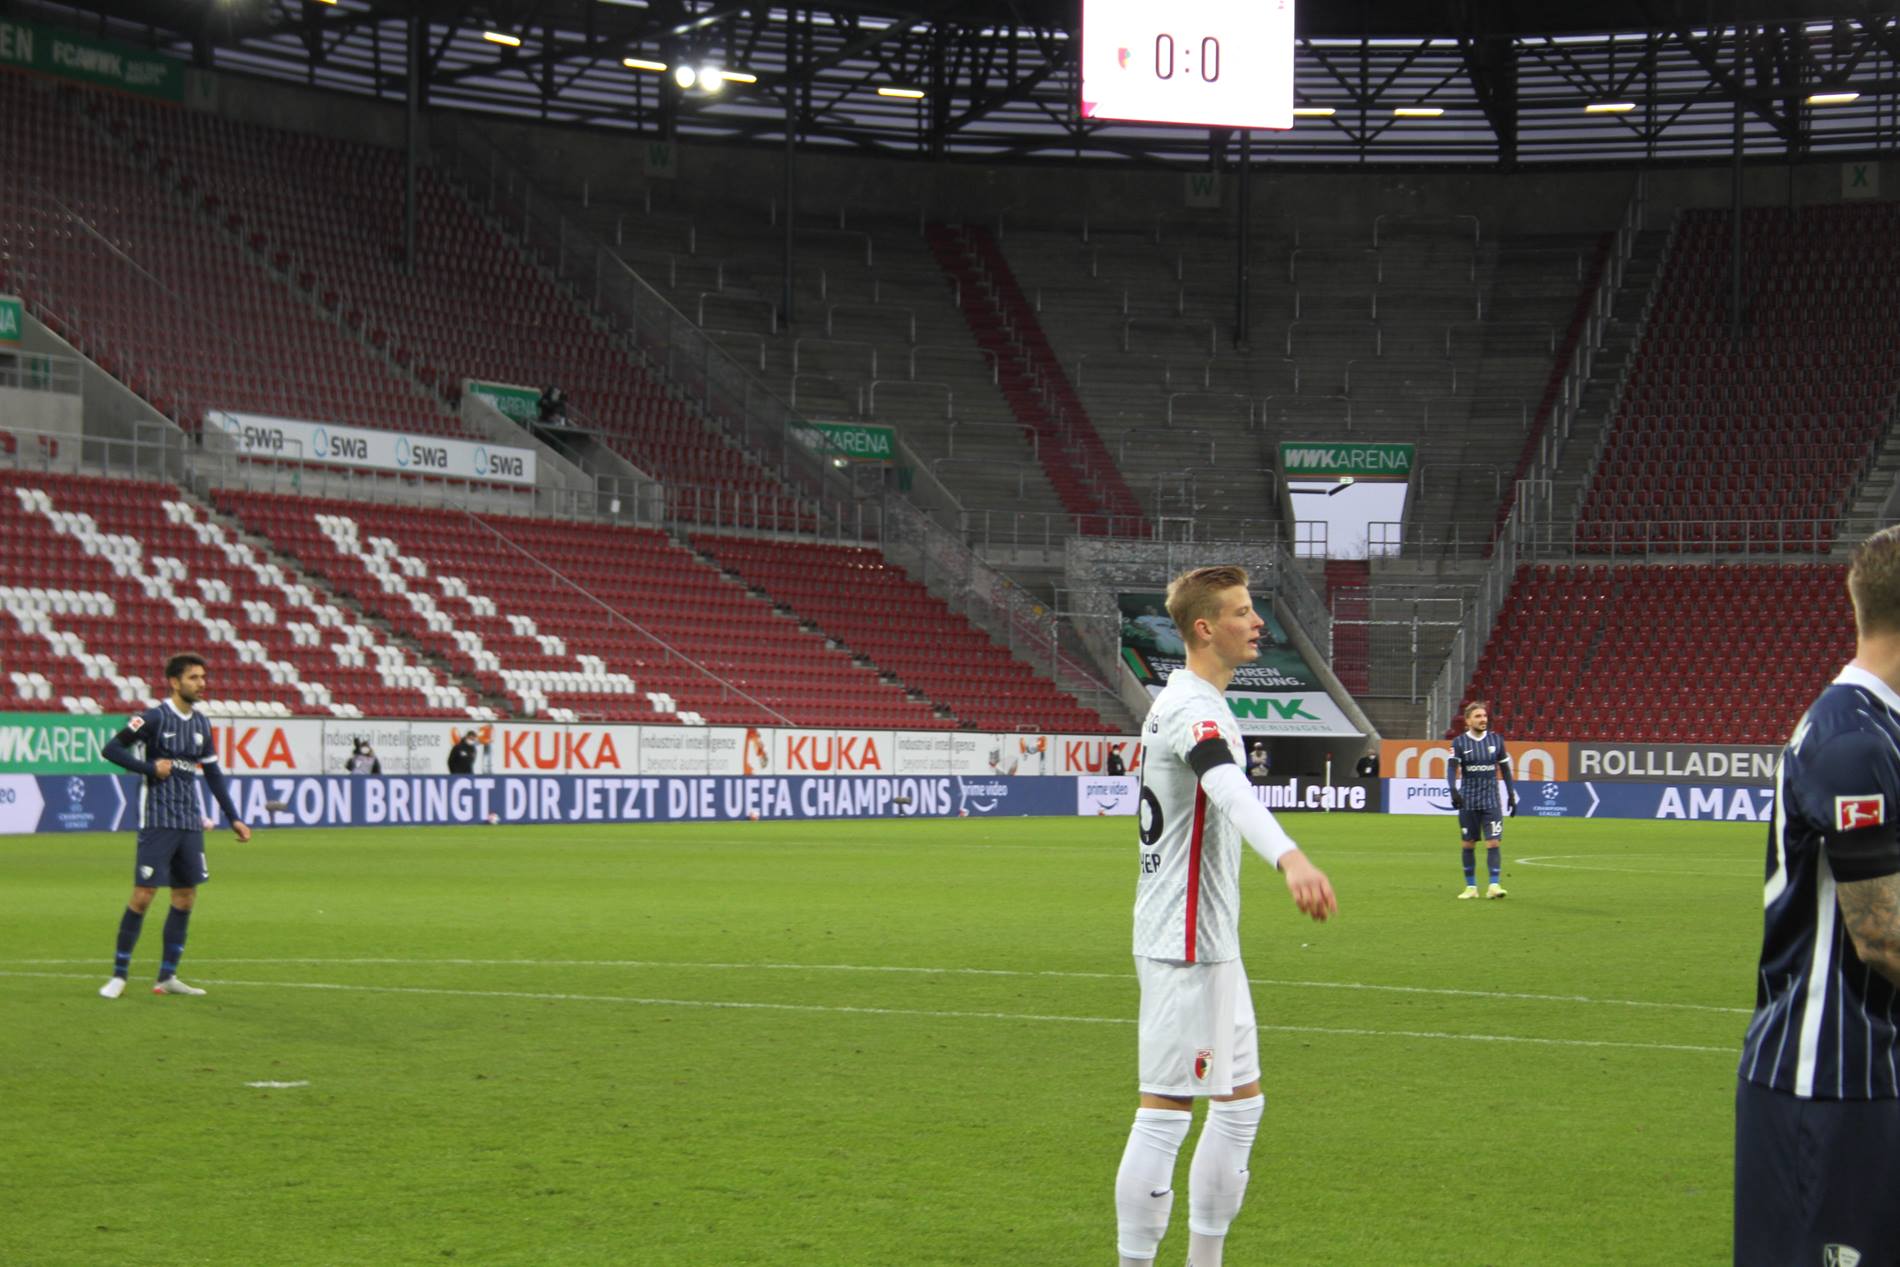 Game scene from a home match of FC Augsburg